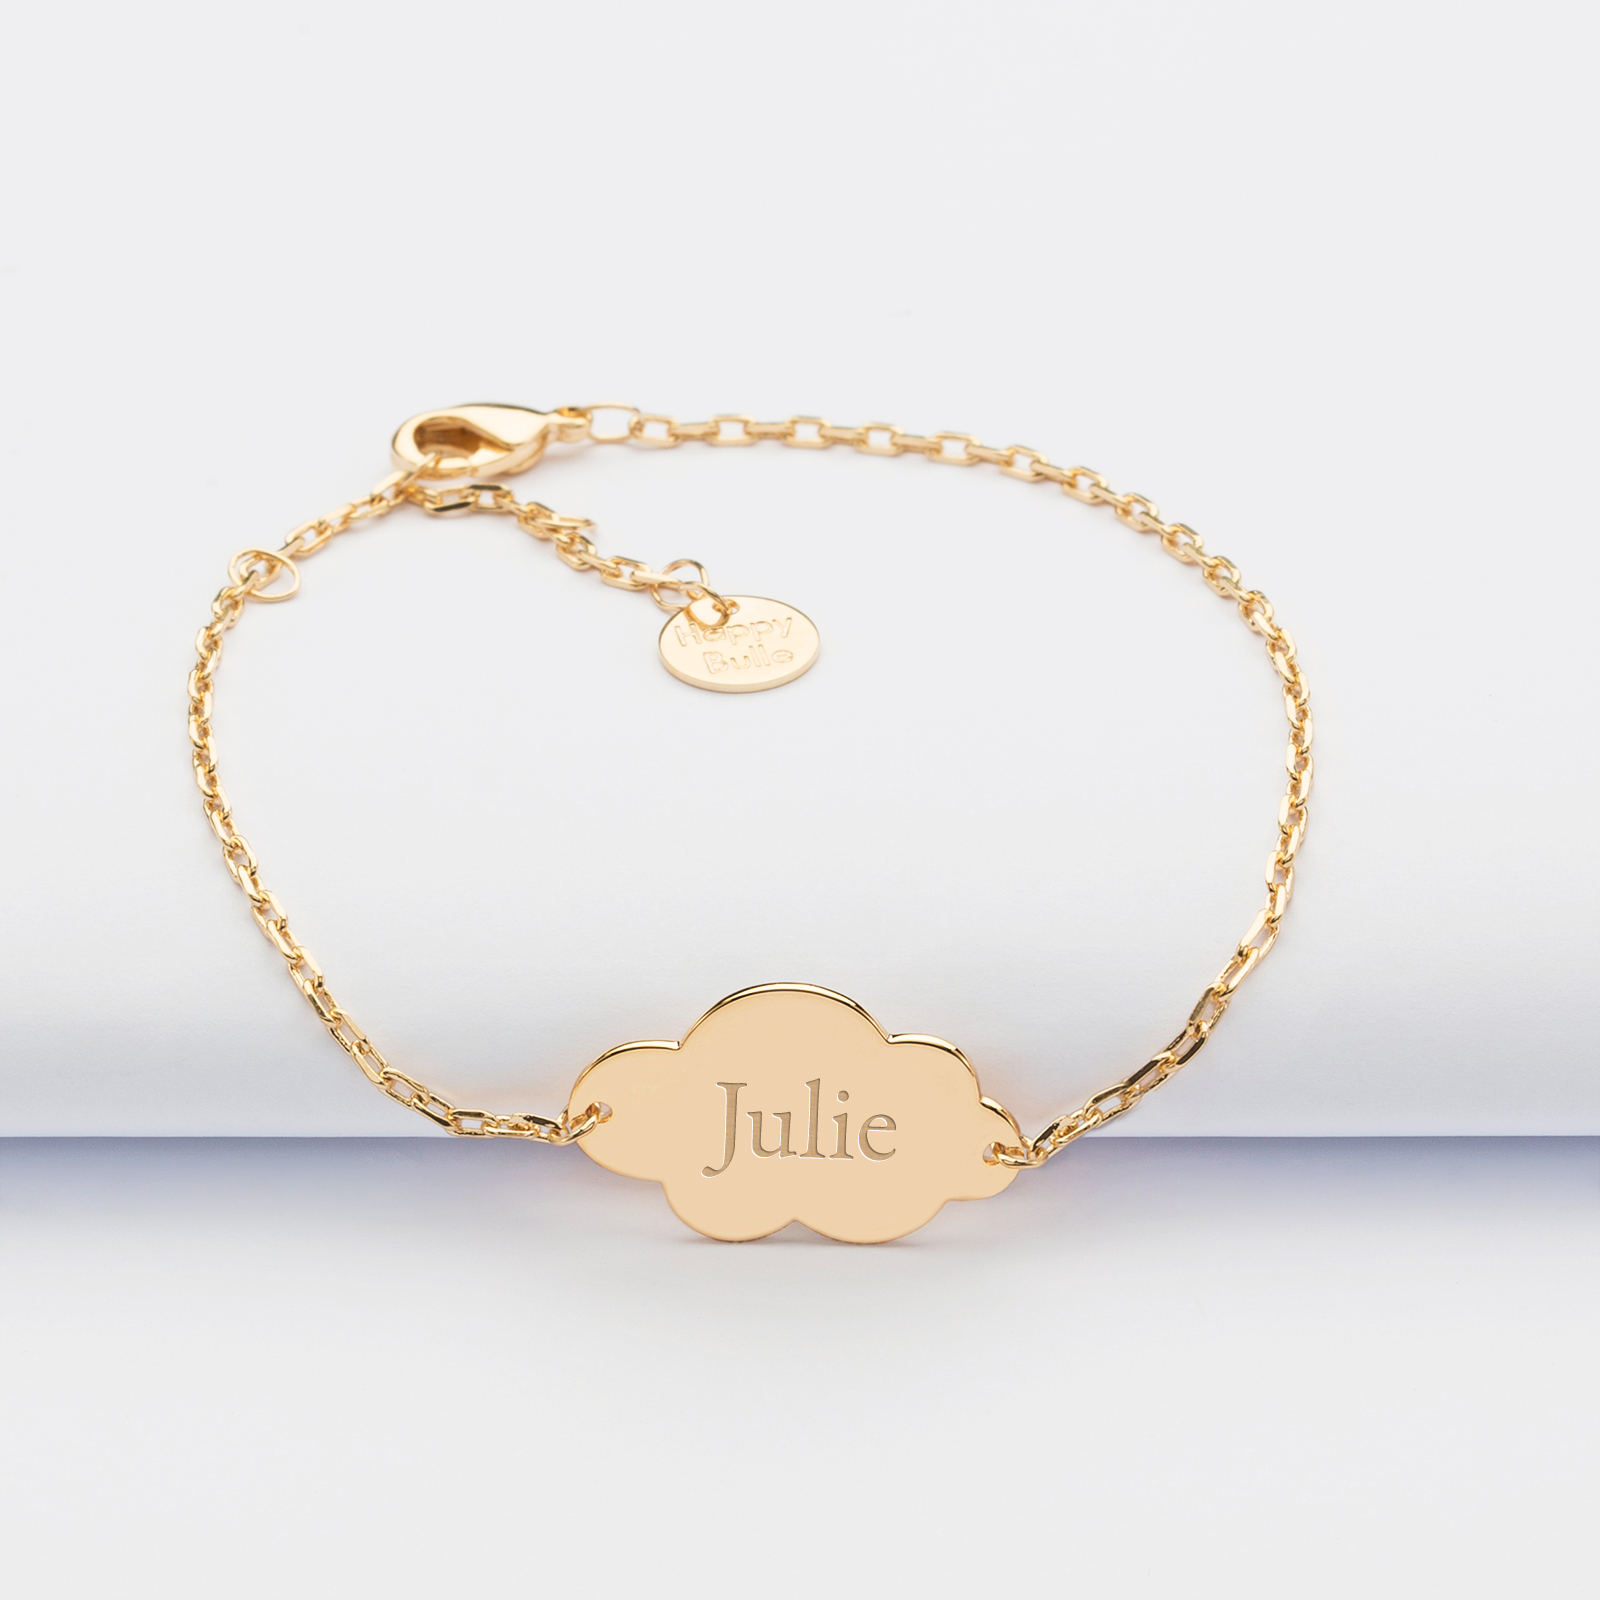 Personalised engraved gold plated cloud medallion 2-hole chain bracelet 20x14mm name